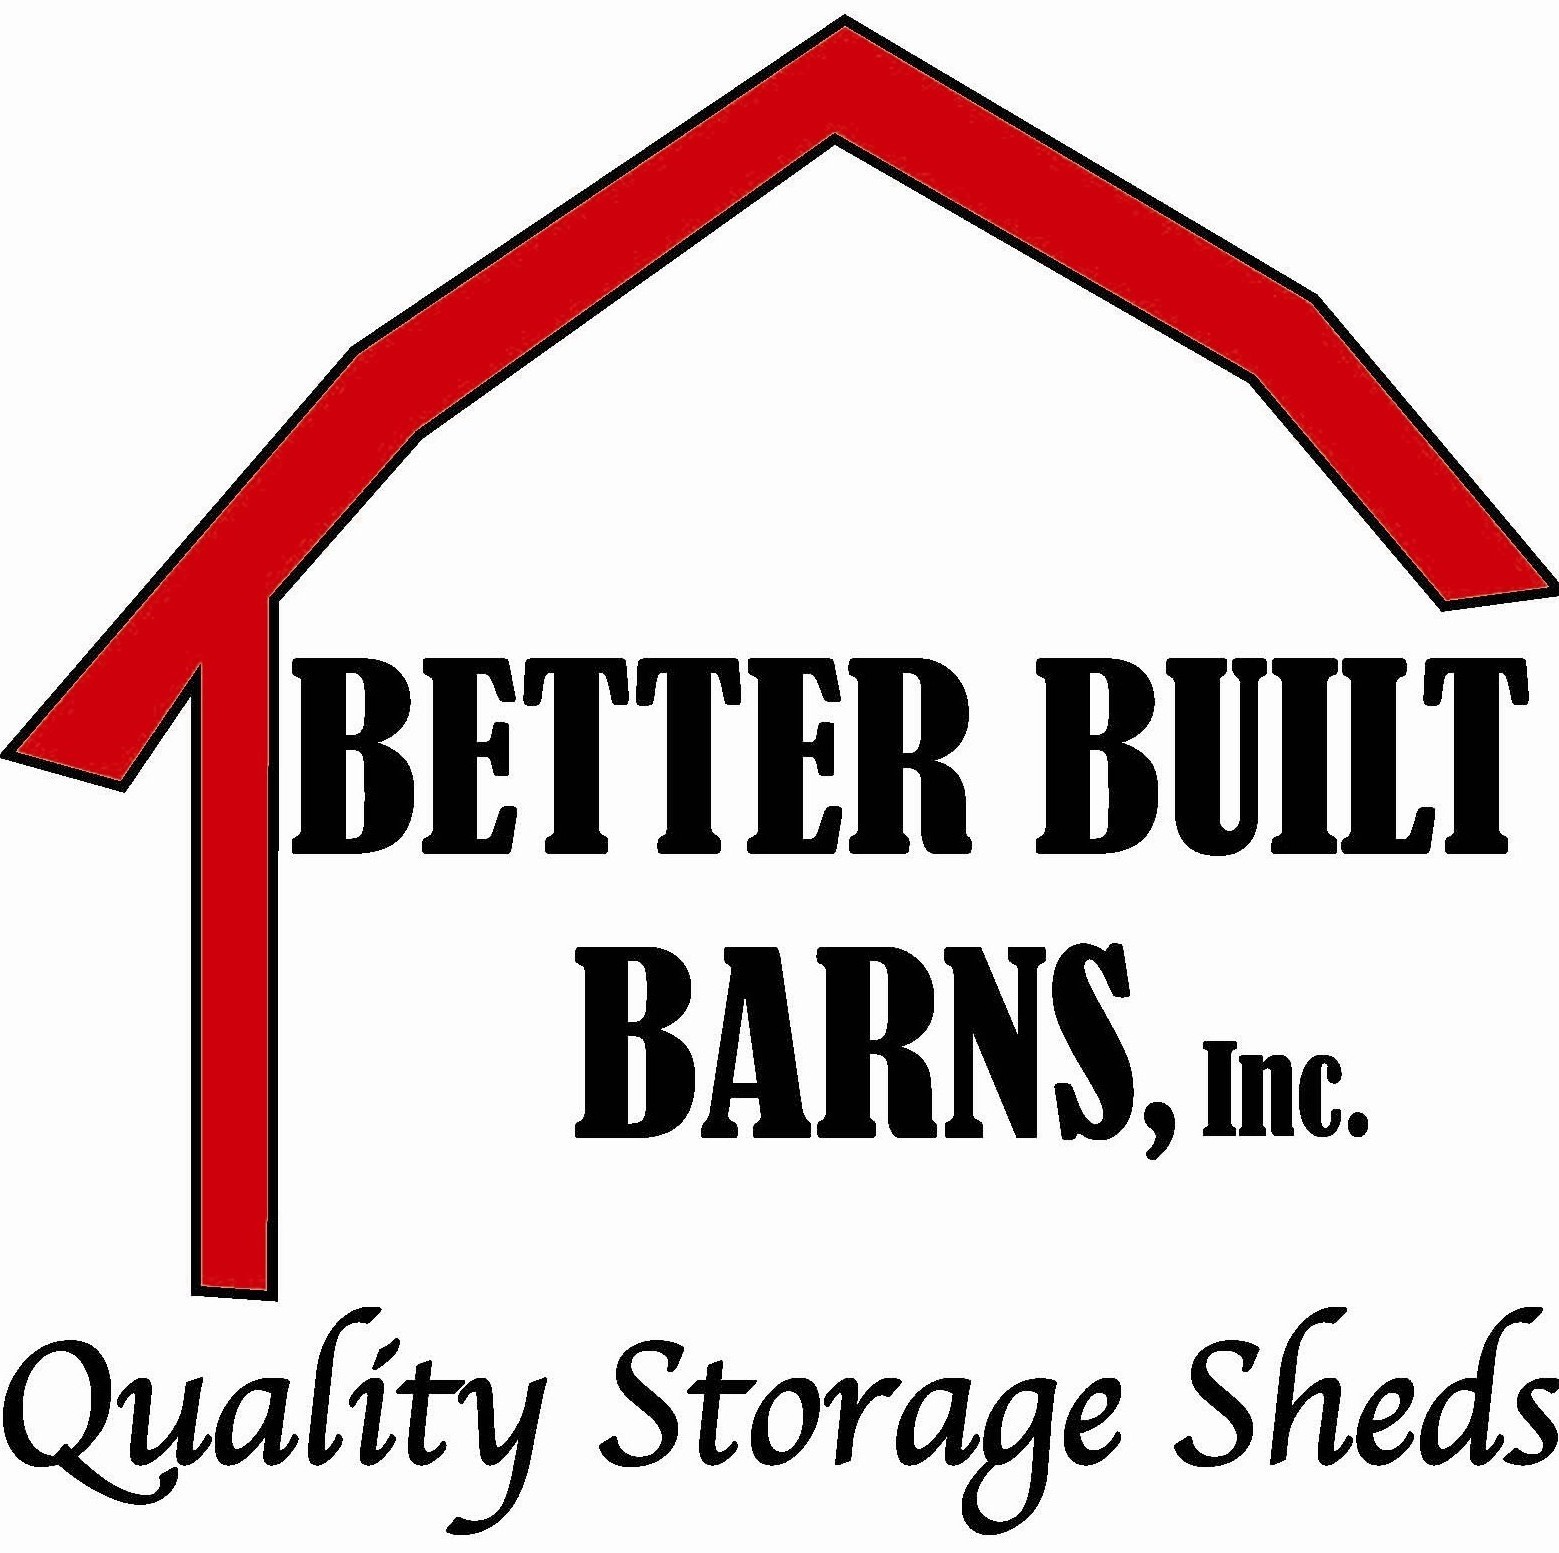 Custom Shed Builders OR, WA, ID and Colorado. Better Built Barns Inc.